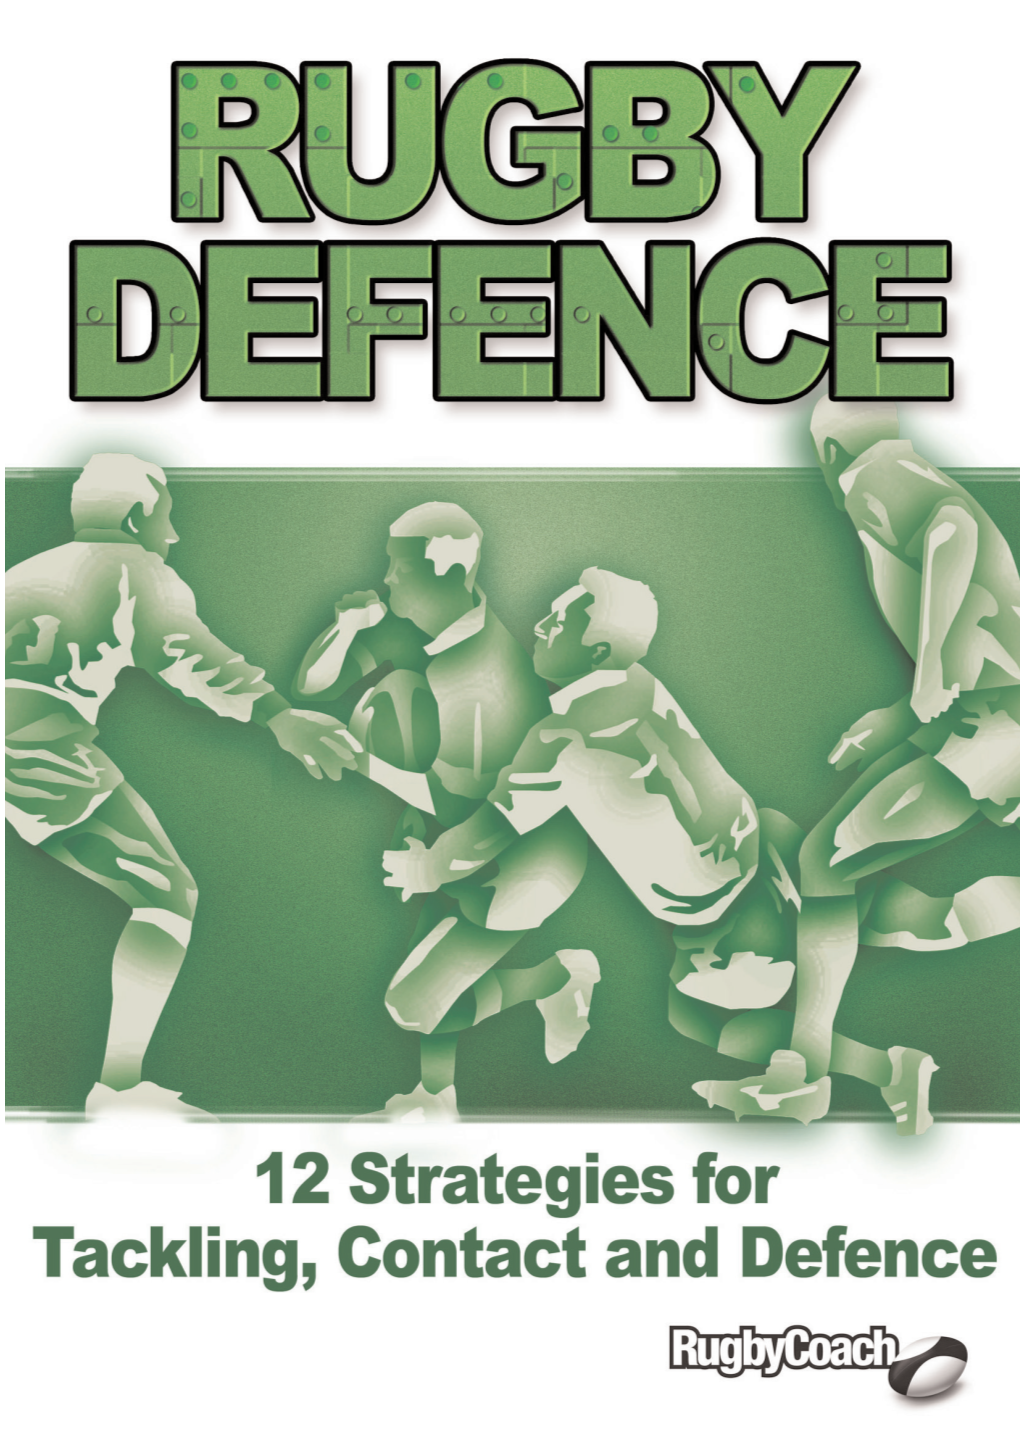 Defensive Systems